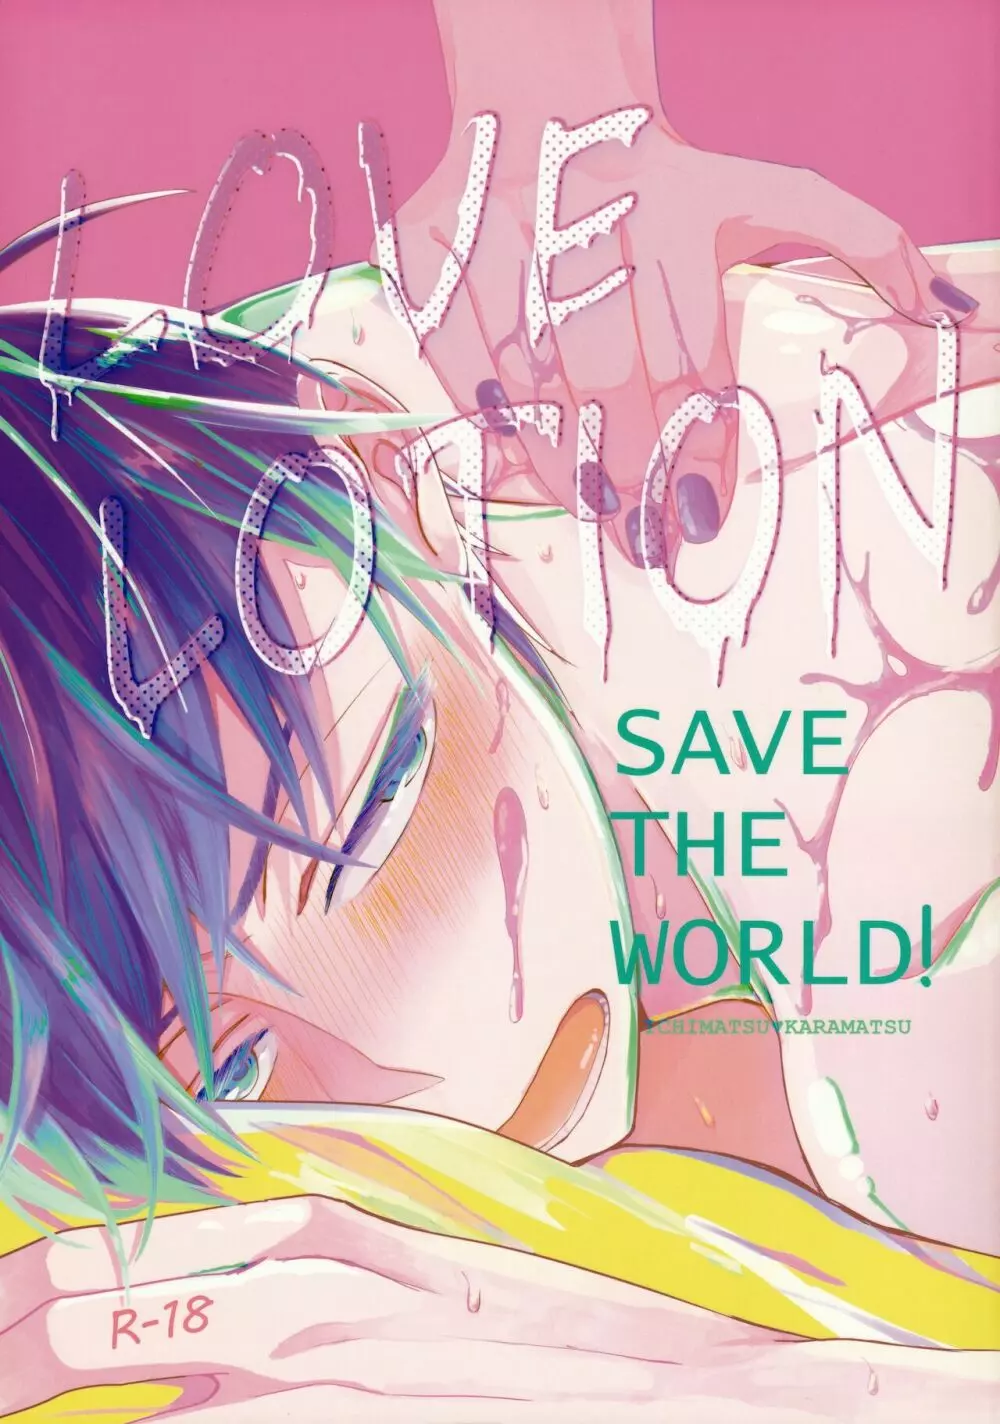 LOVE LOTION SAVE THE WORLD!